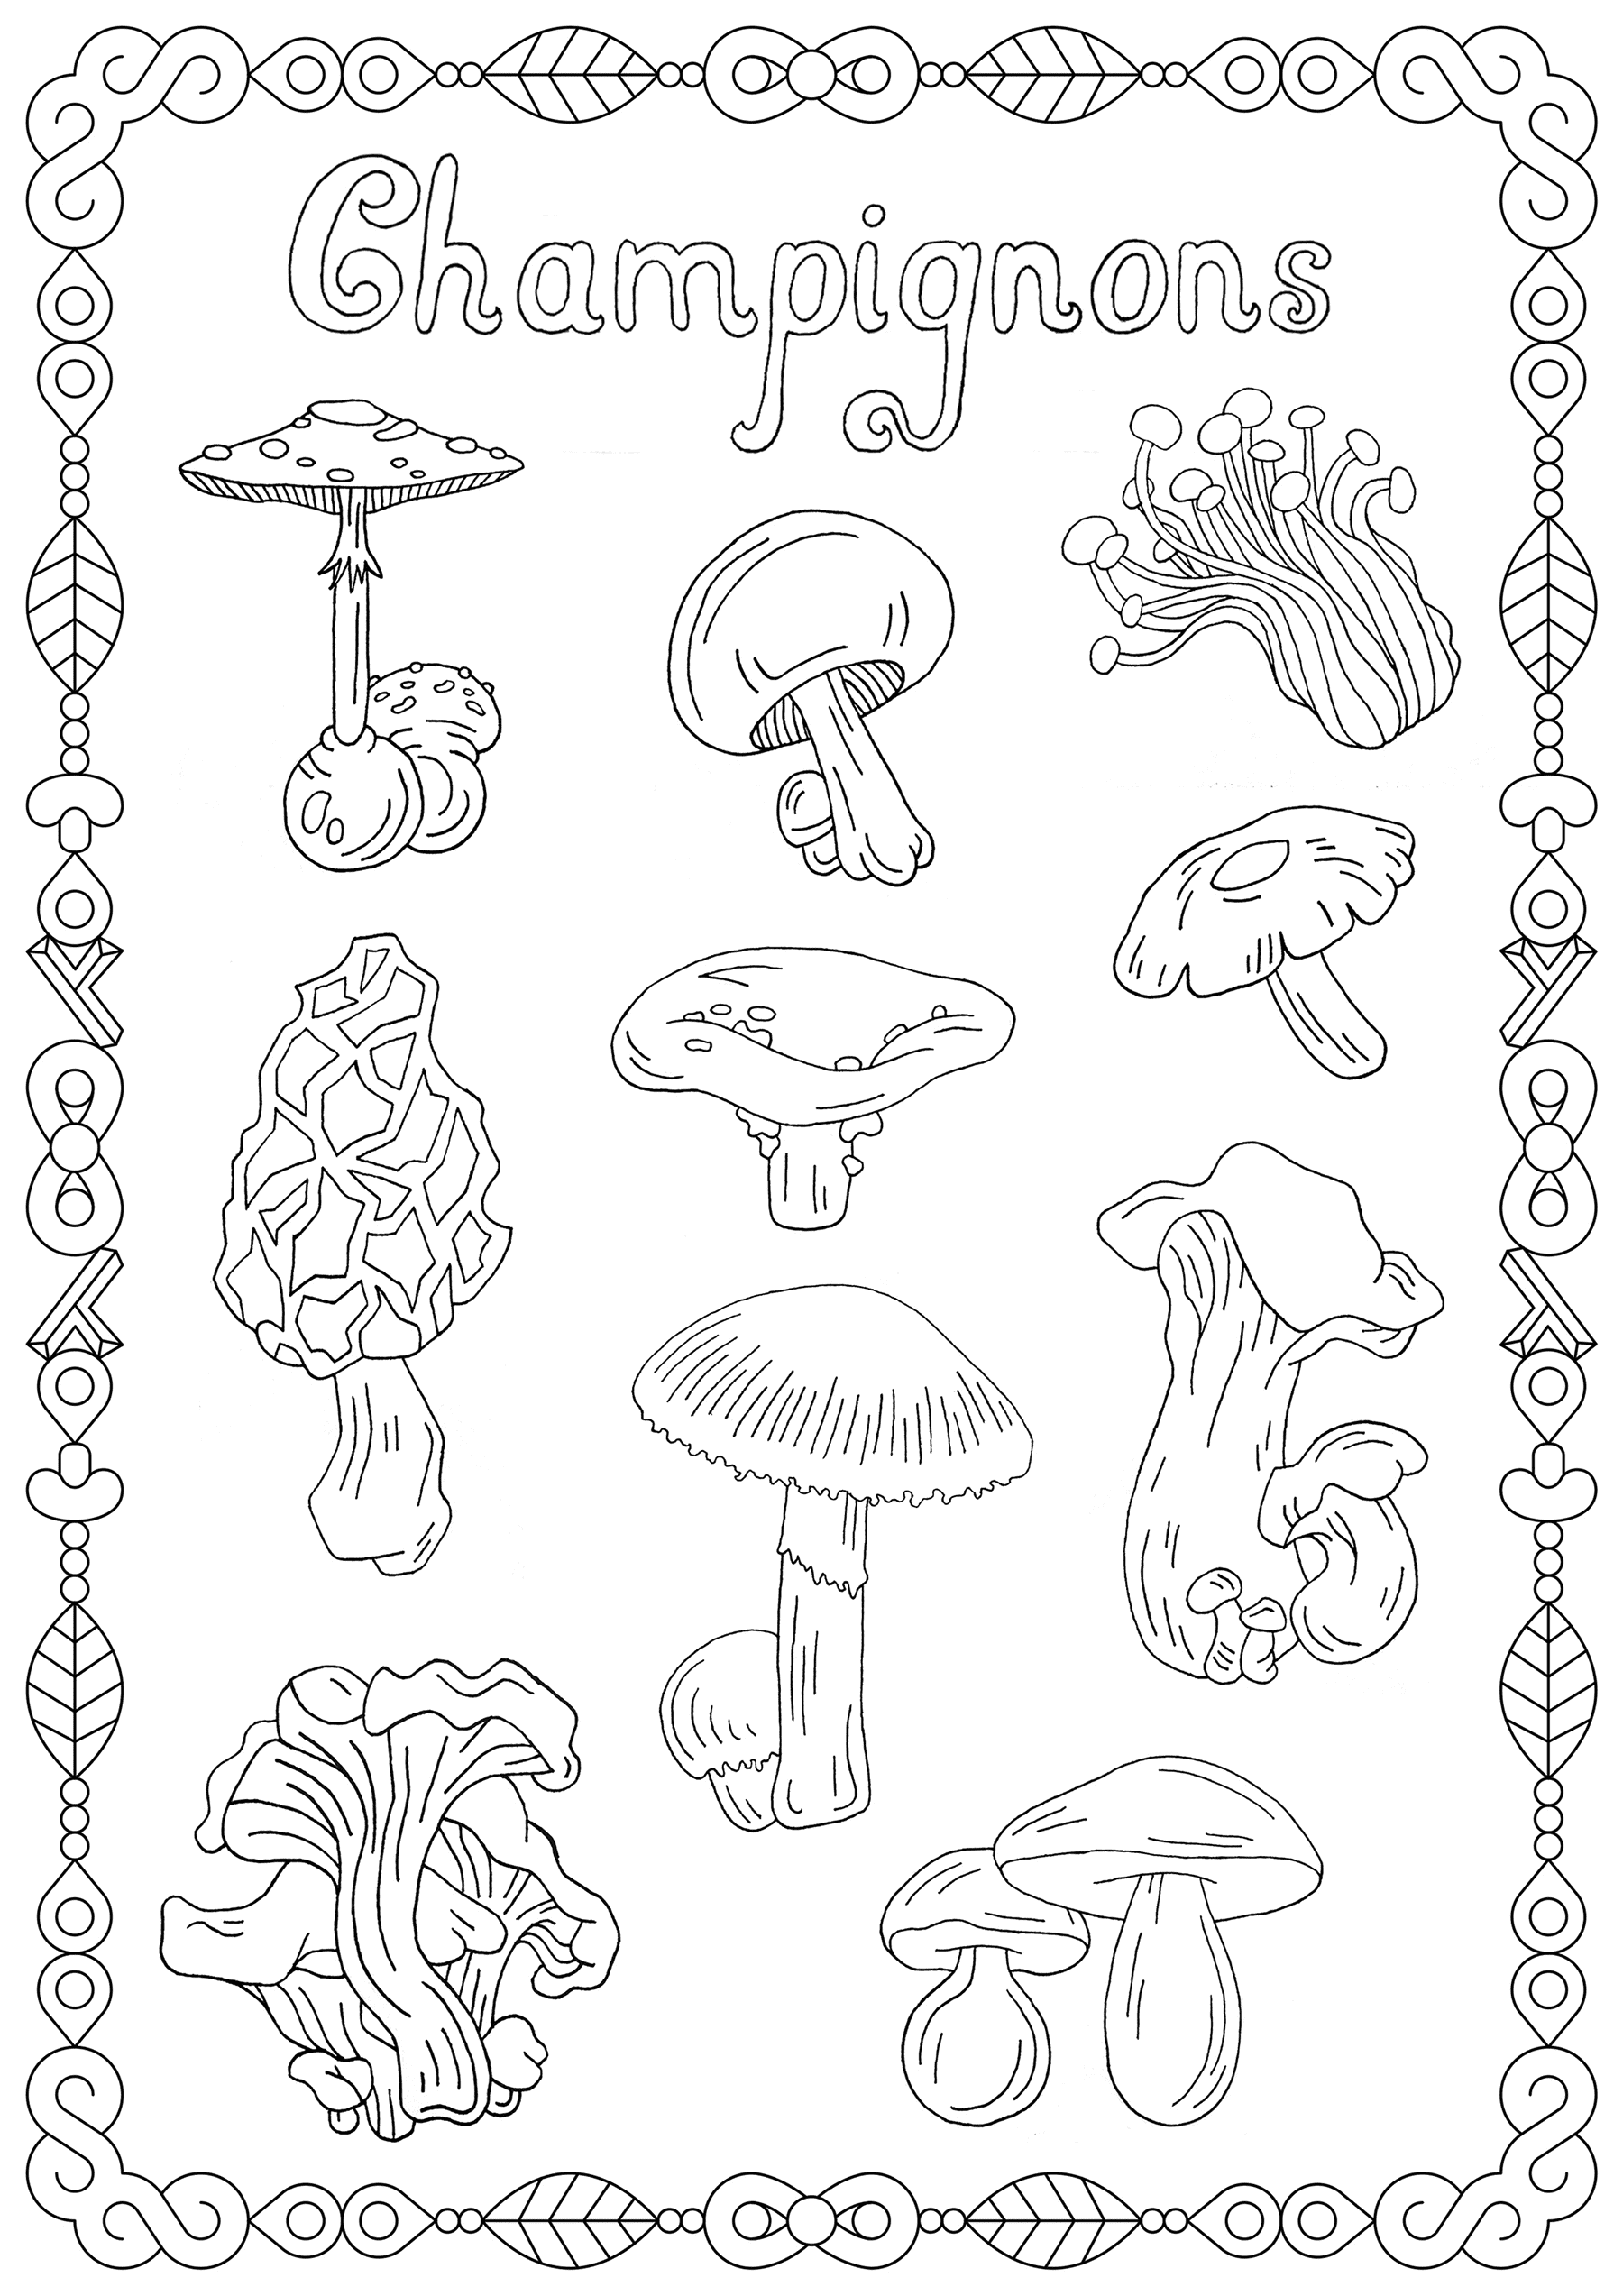 Mushrooms Coloring Page With Few Details For Kids Coloring Page